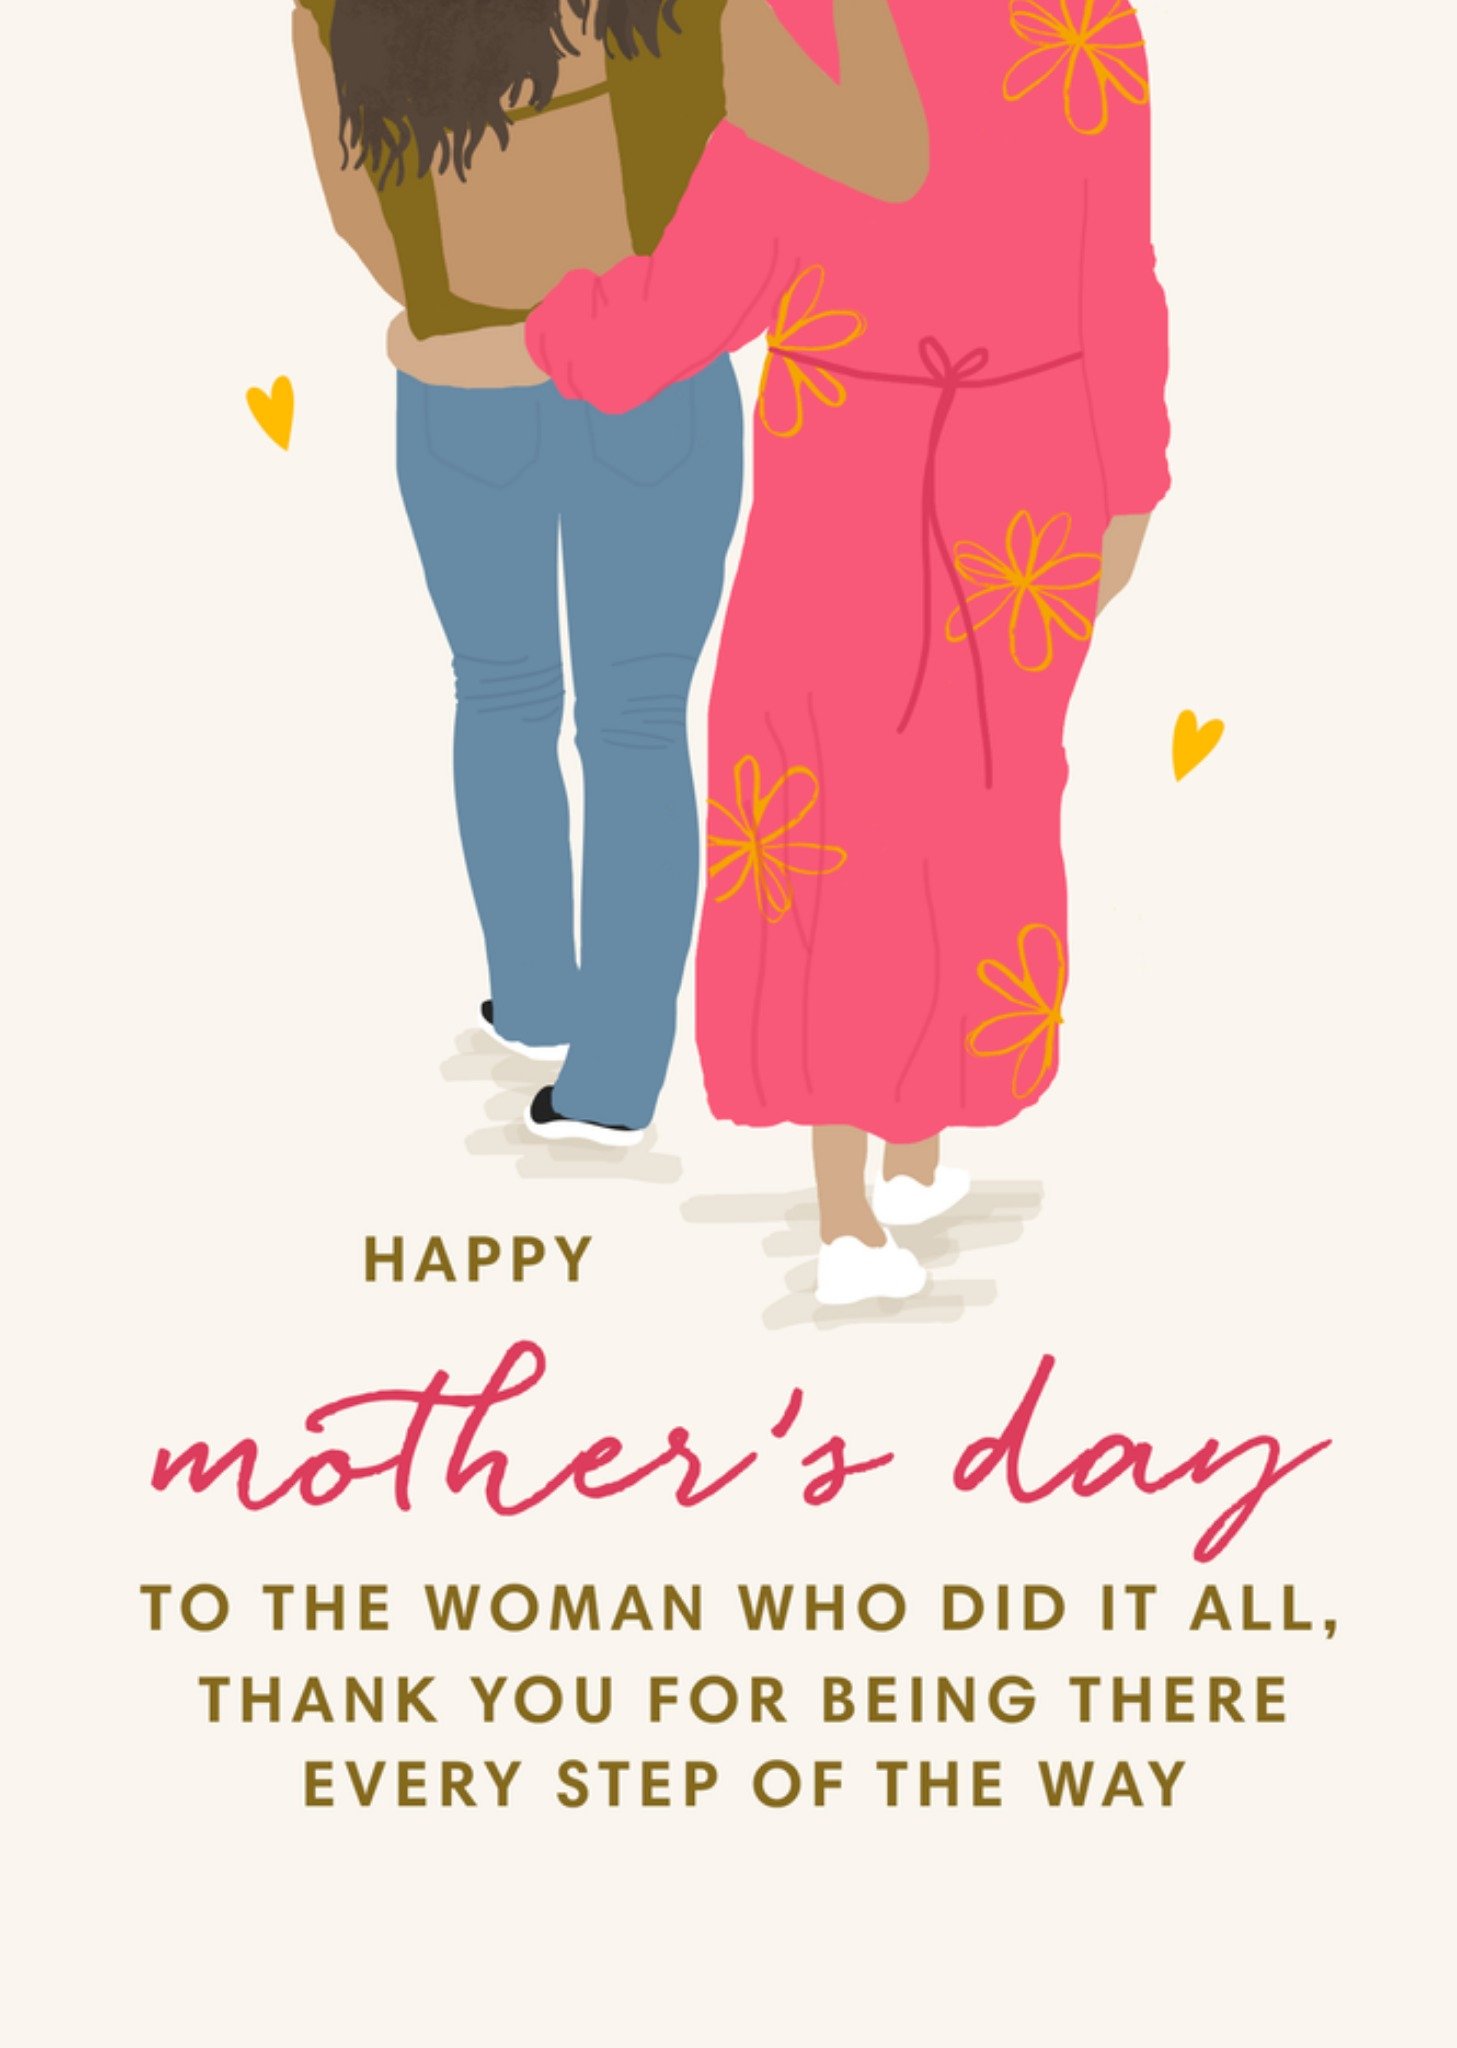 Moonpig The Woman Who Did It All Mother's Day Card Ecard